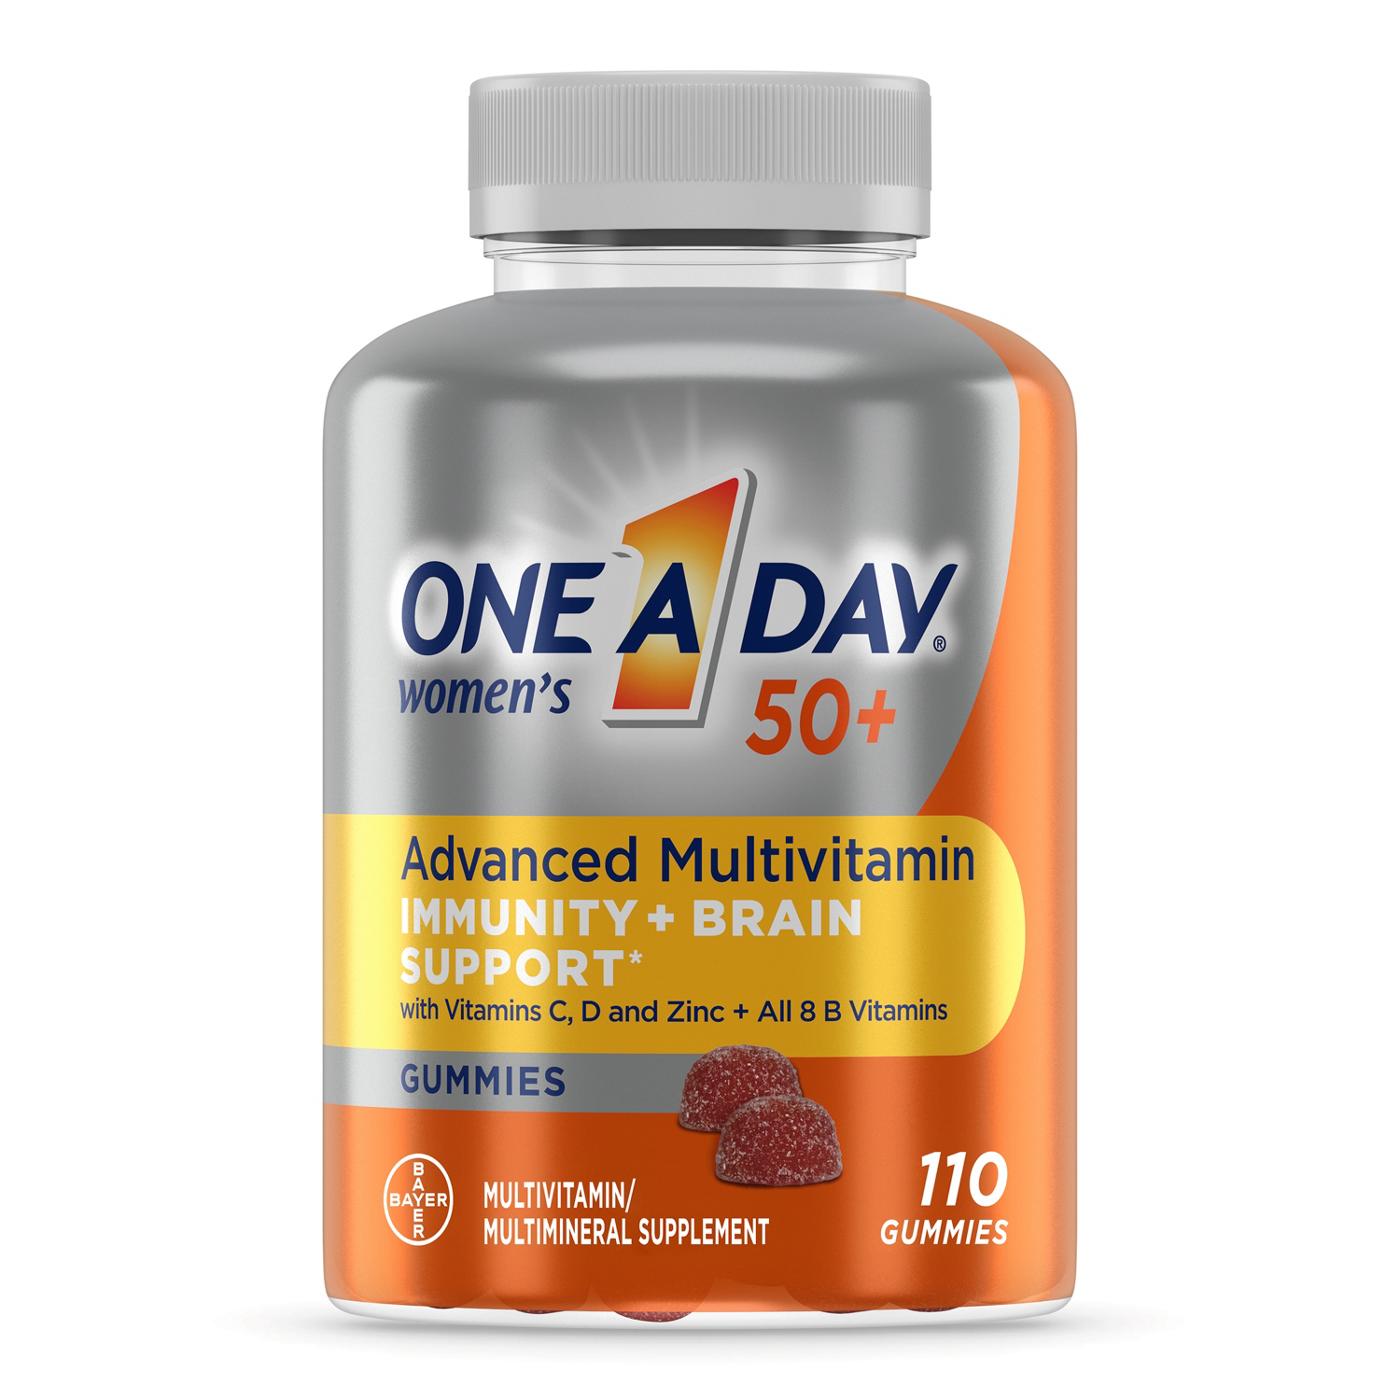 One A Day Women's 50+ Advanced Multivitamin Gummies; image 1 of 5